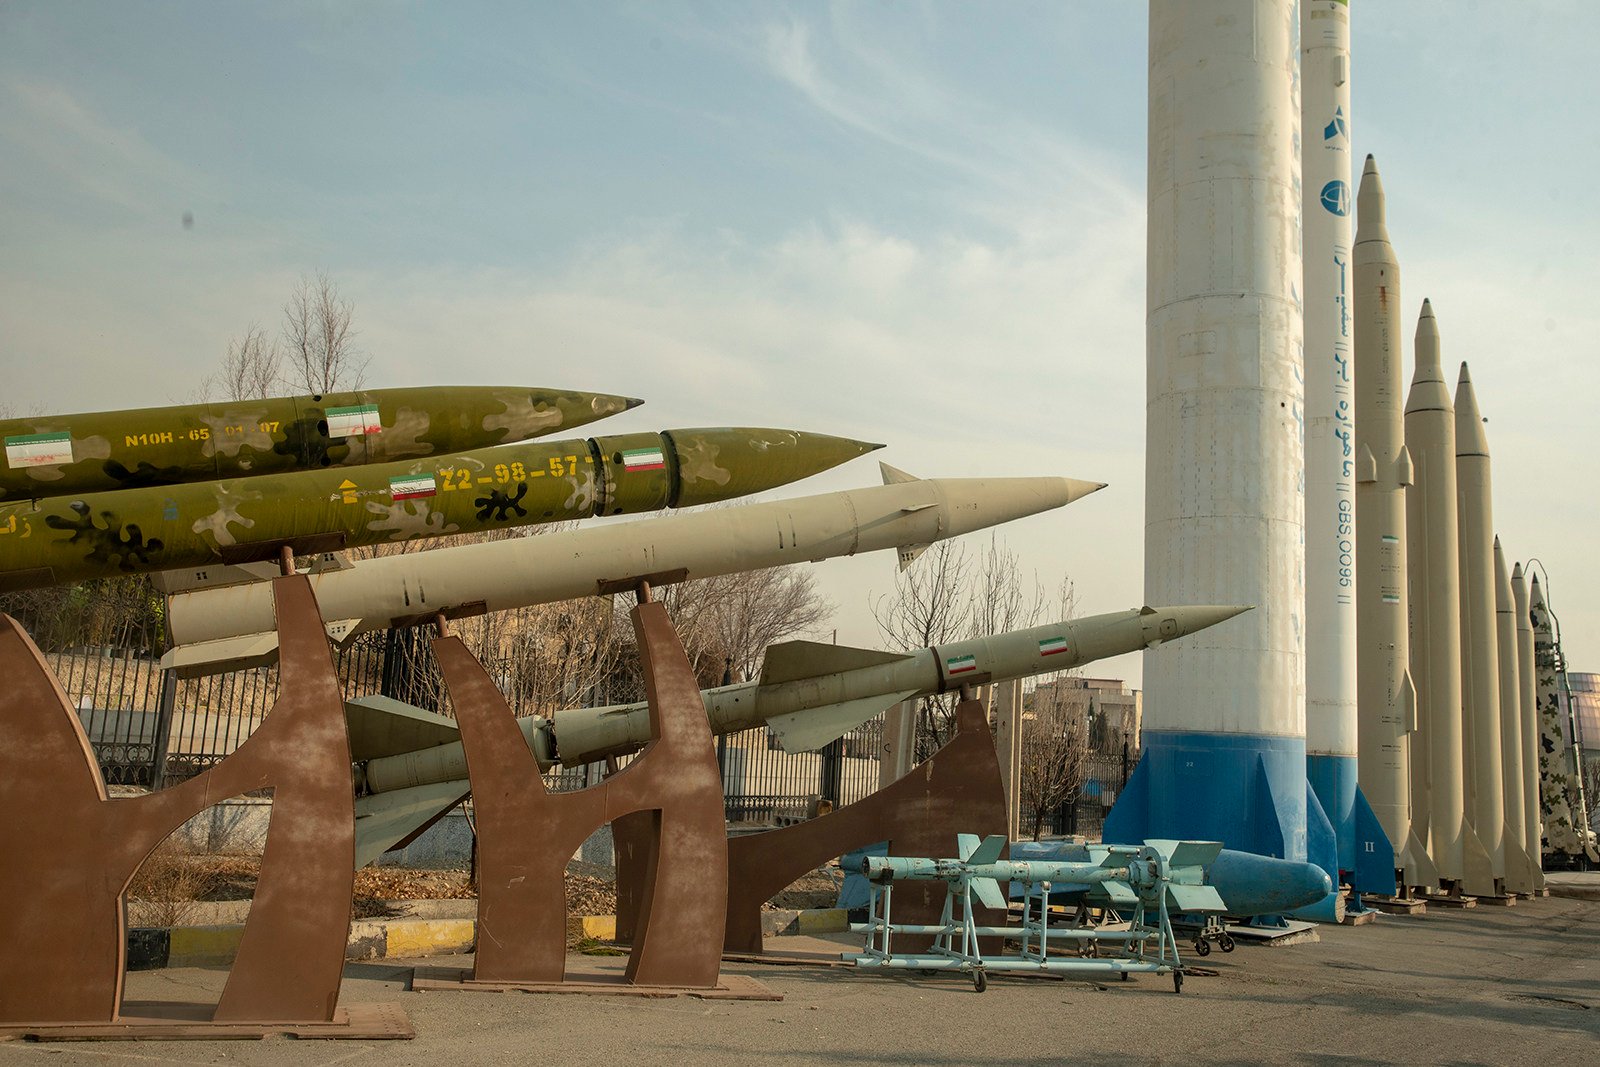 Iranian missiles are exhibited in a park in Tehran in January. File photo: TNS